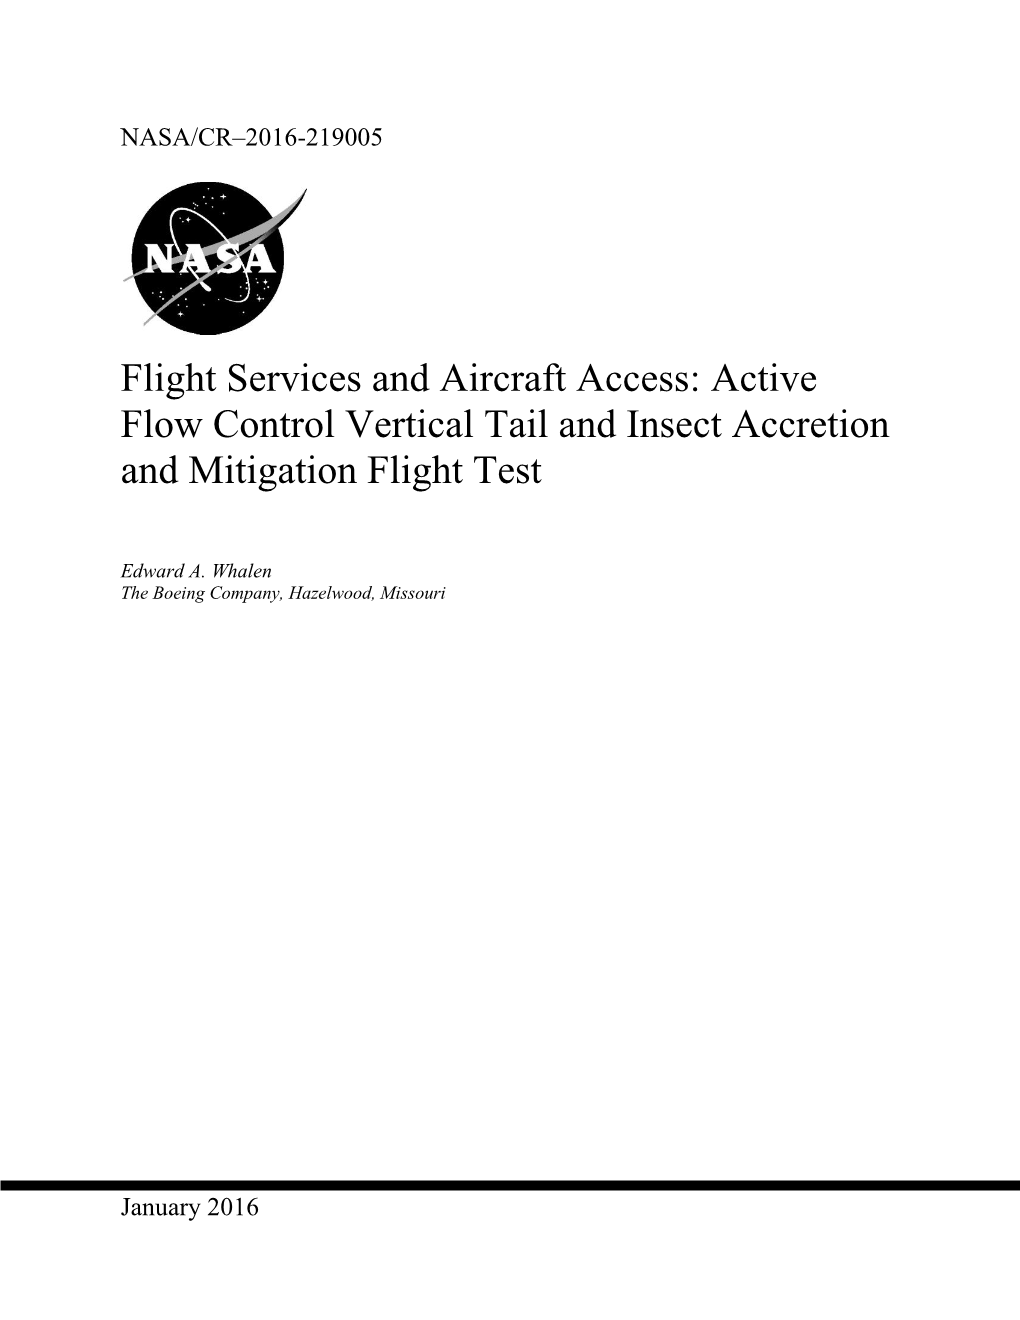 Flight Services and Aircraft Access: Active Flow Control Vertical Tail and Insect Accretion and Mitigation Flight Test